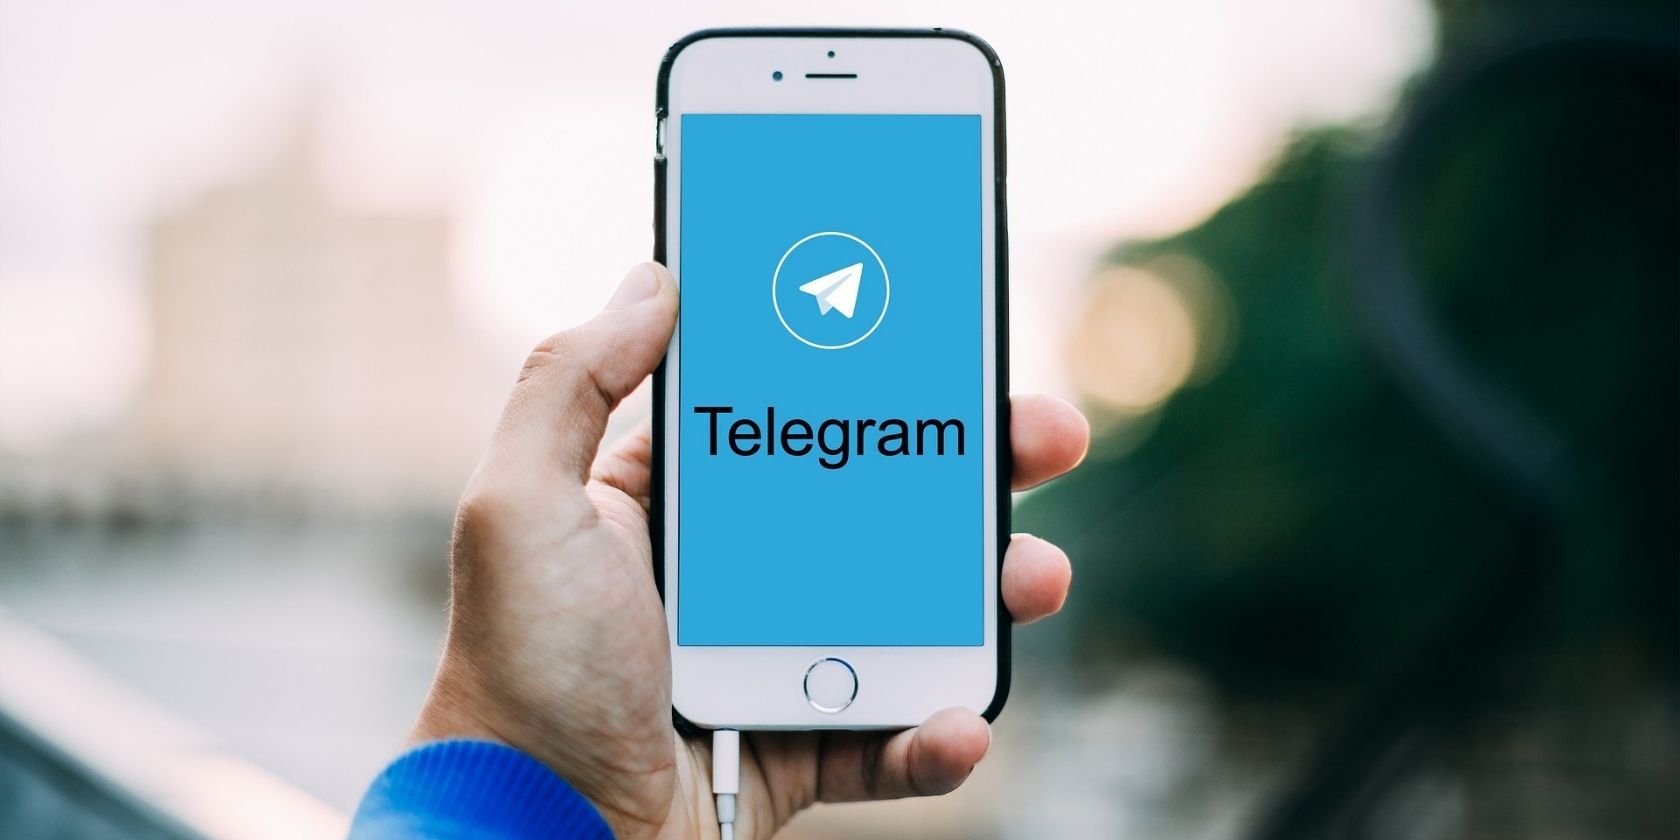 The Telegram app opening on an iPhone being held by somebody.